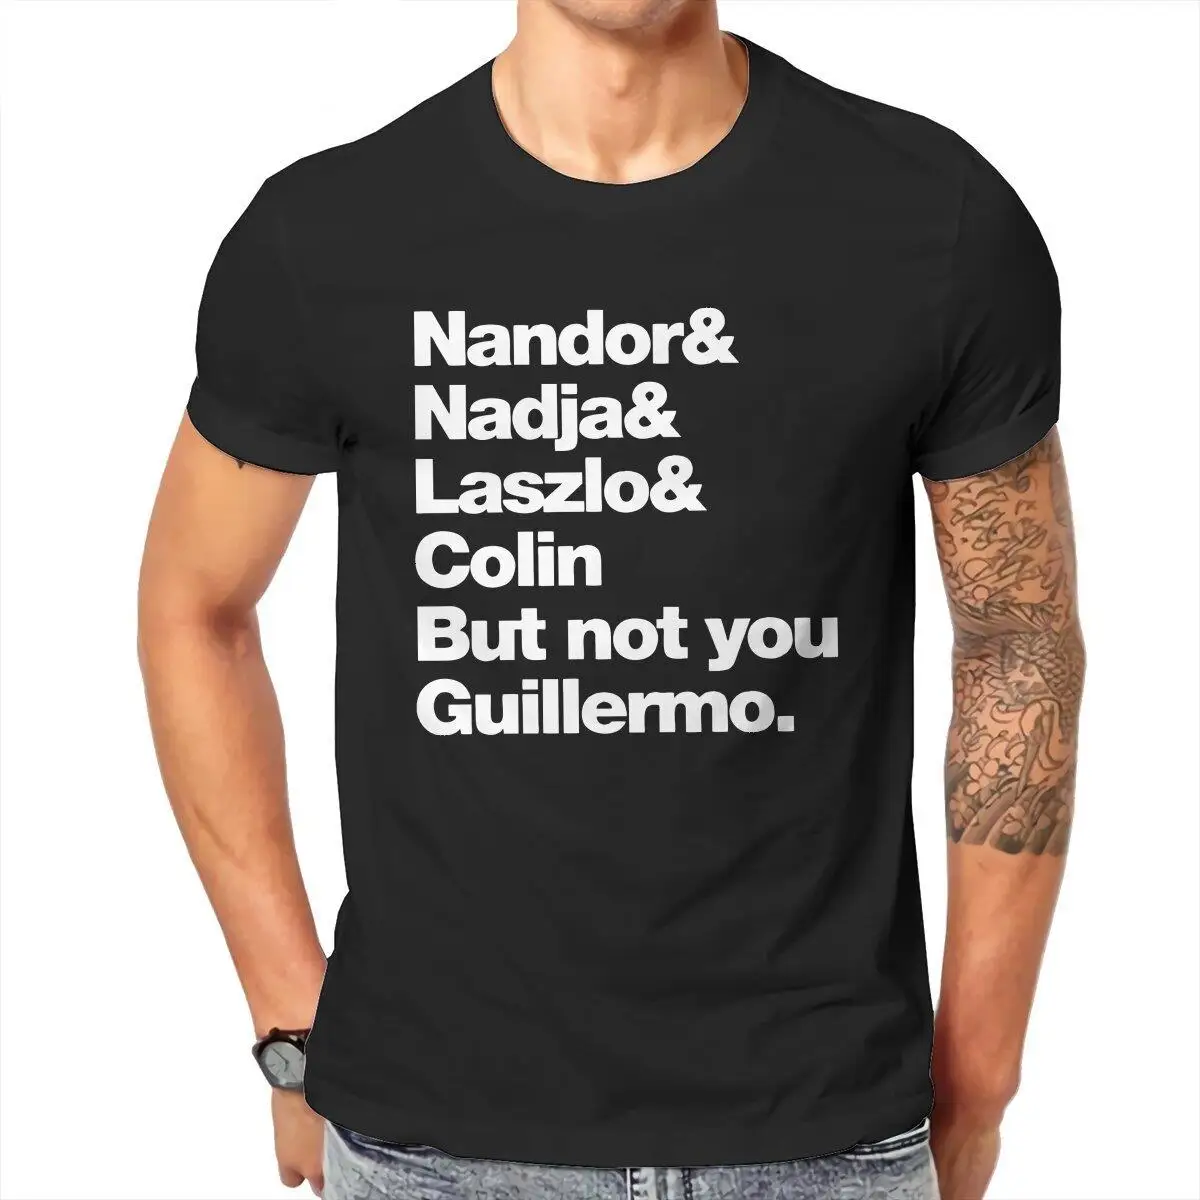 Not You Guillermo  T Shirt Men Pure Cotton Leisure T-Shirts What We Do in the Shadows Tee Shirt Short Sleeve Tops Plus Size